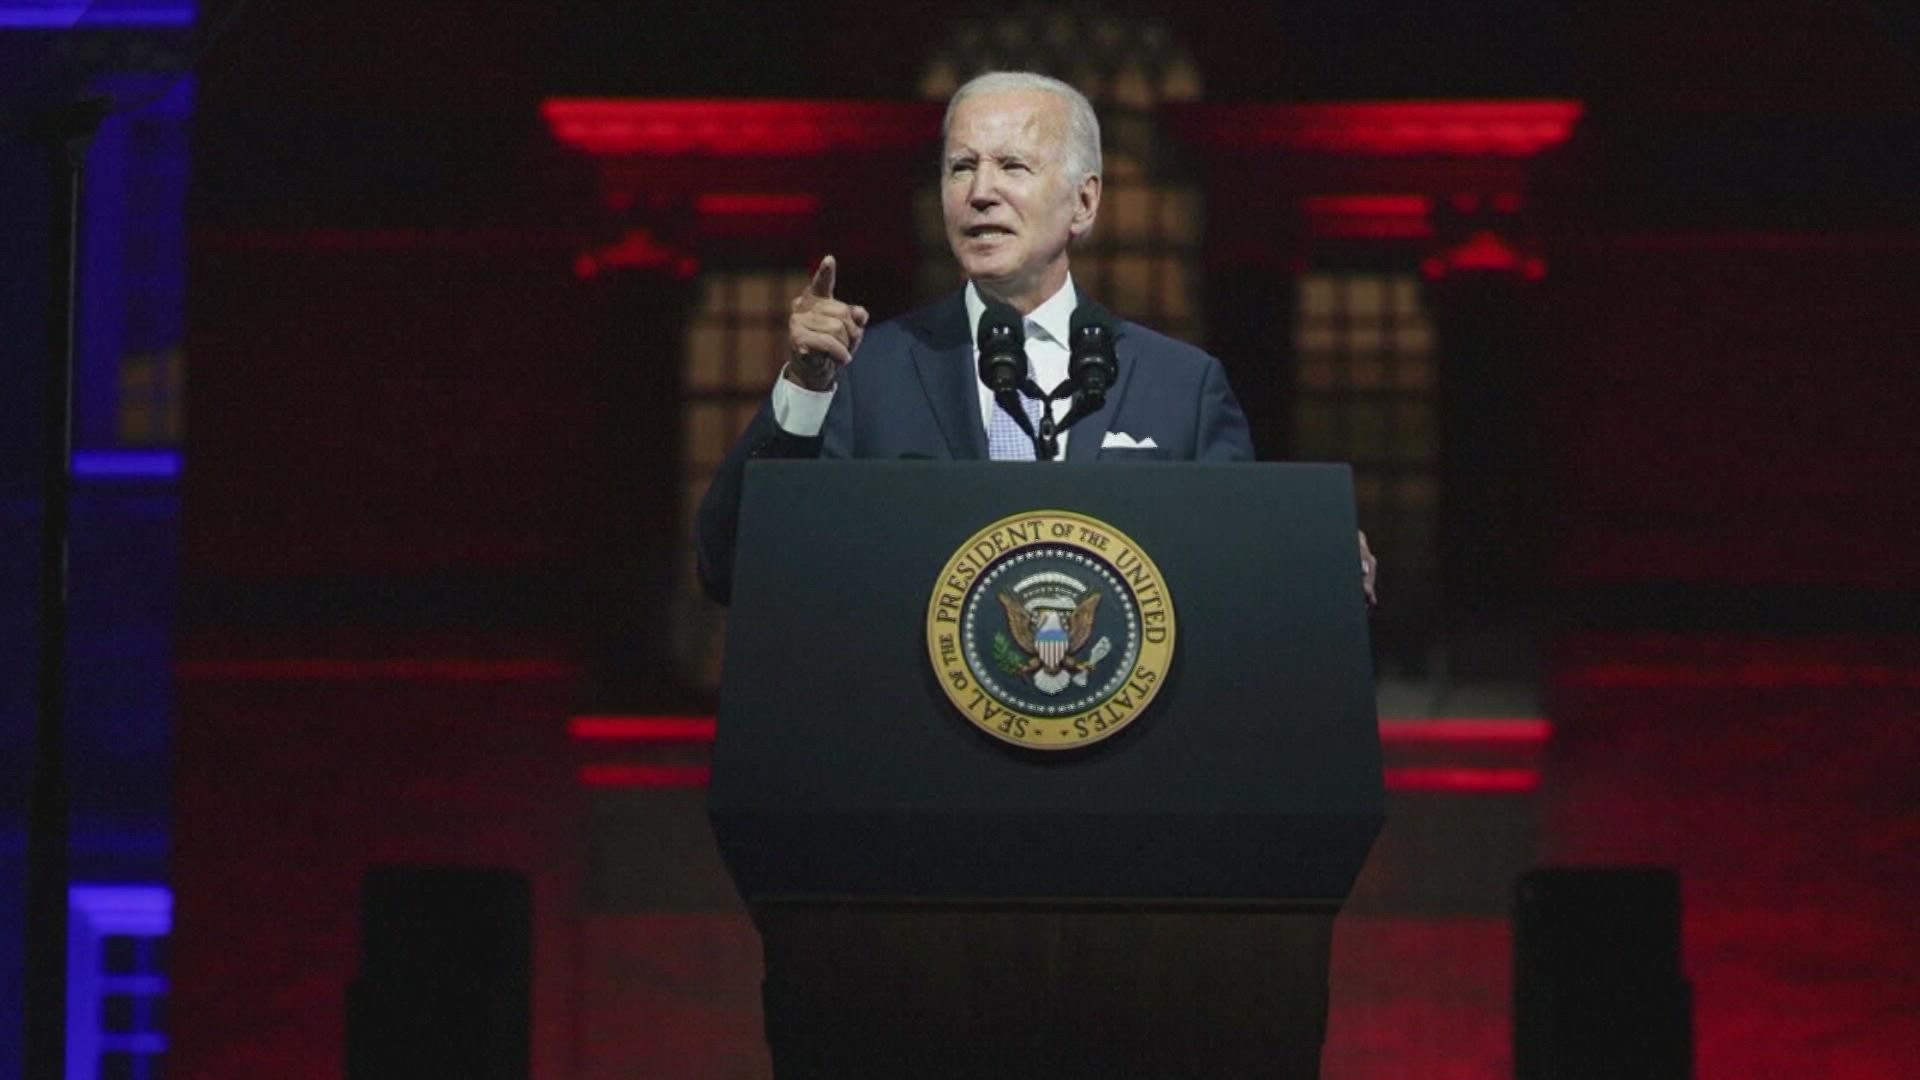 Biden made a third trip to the Keystone state in less than a week - most recently in Philadelphia delivering a stinging rebuke of so-called "Maga Republicans."